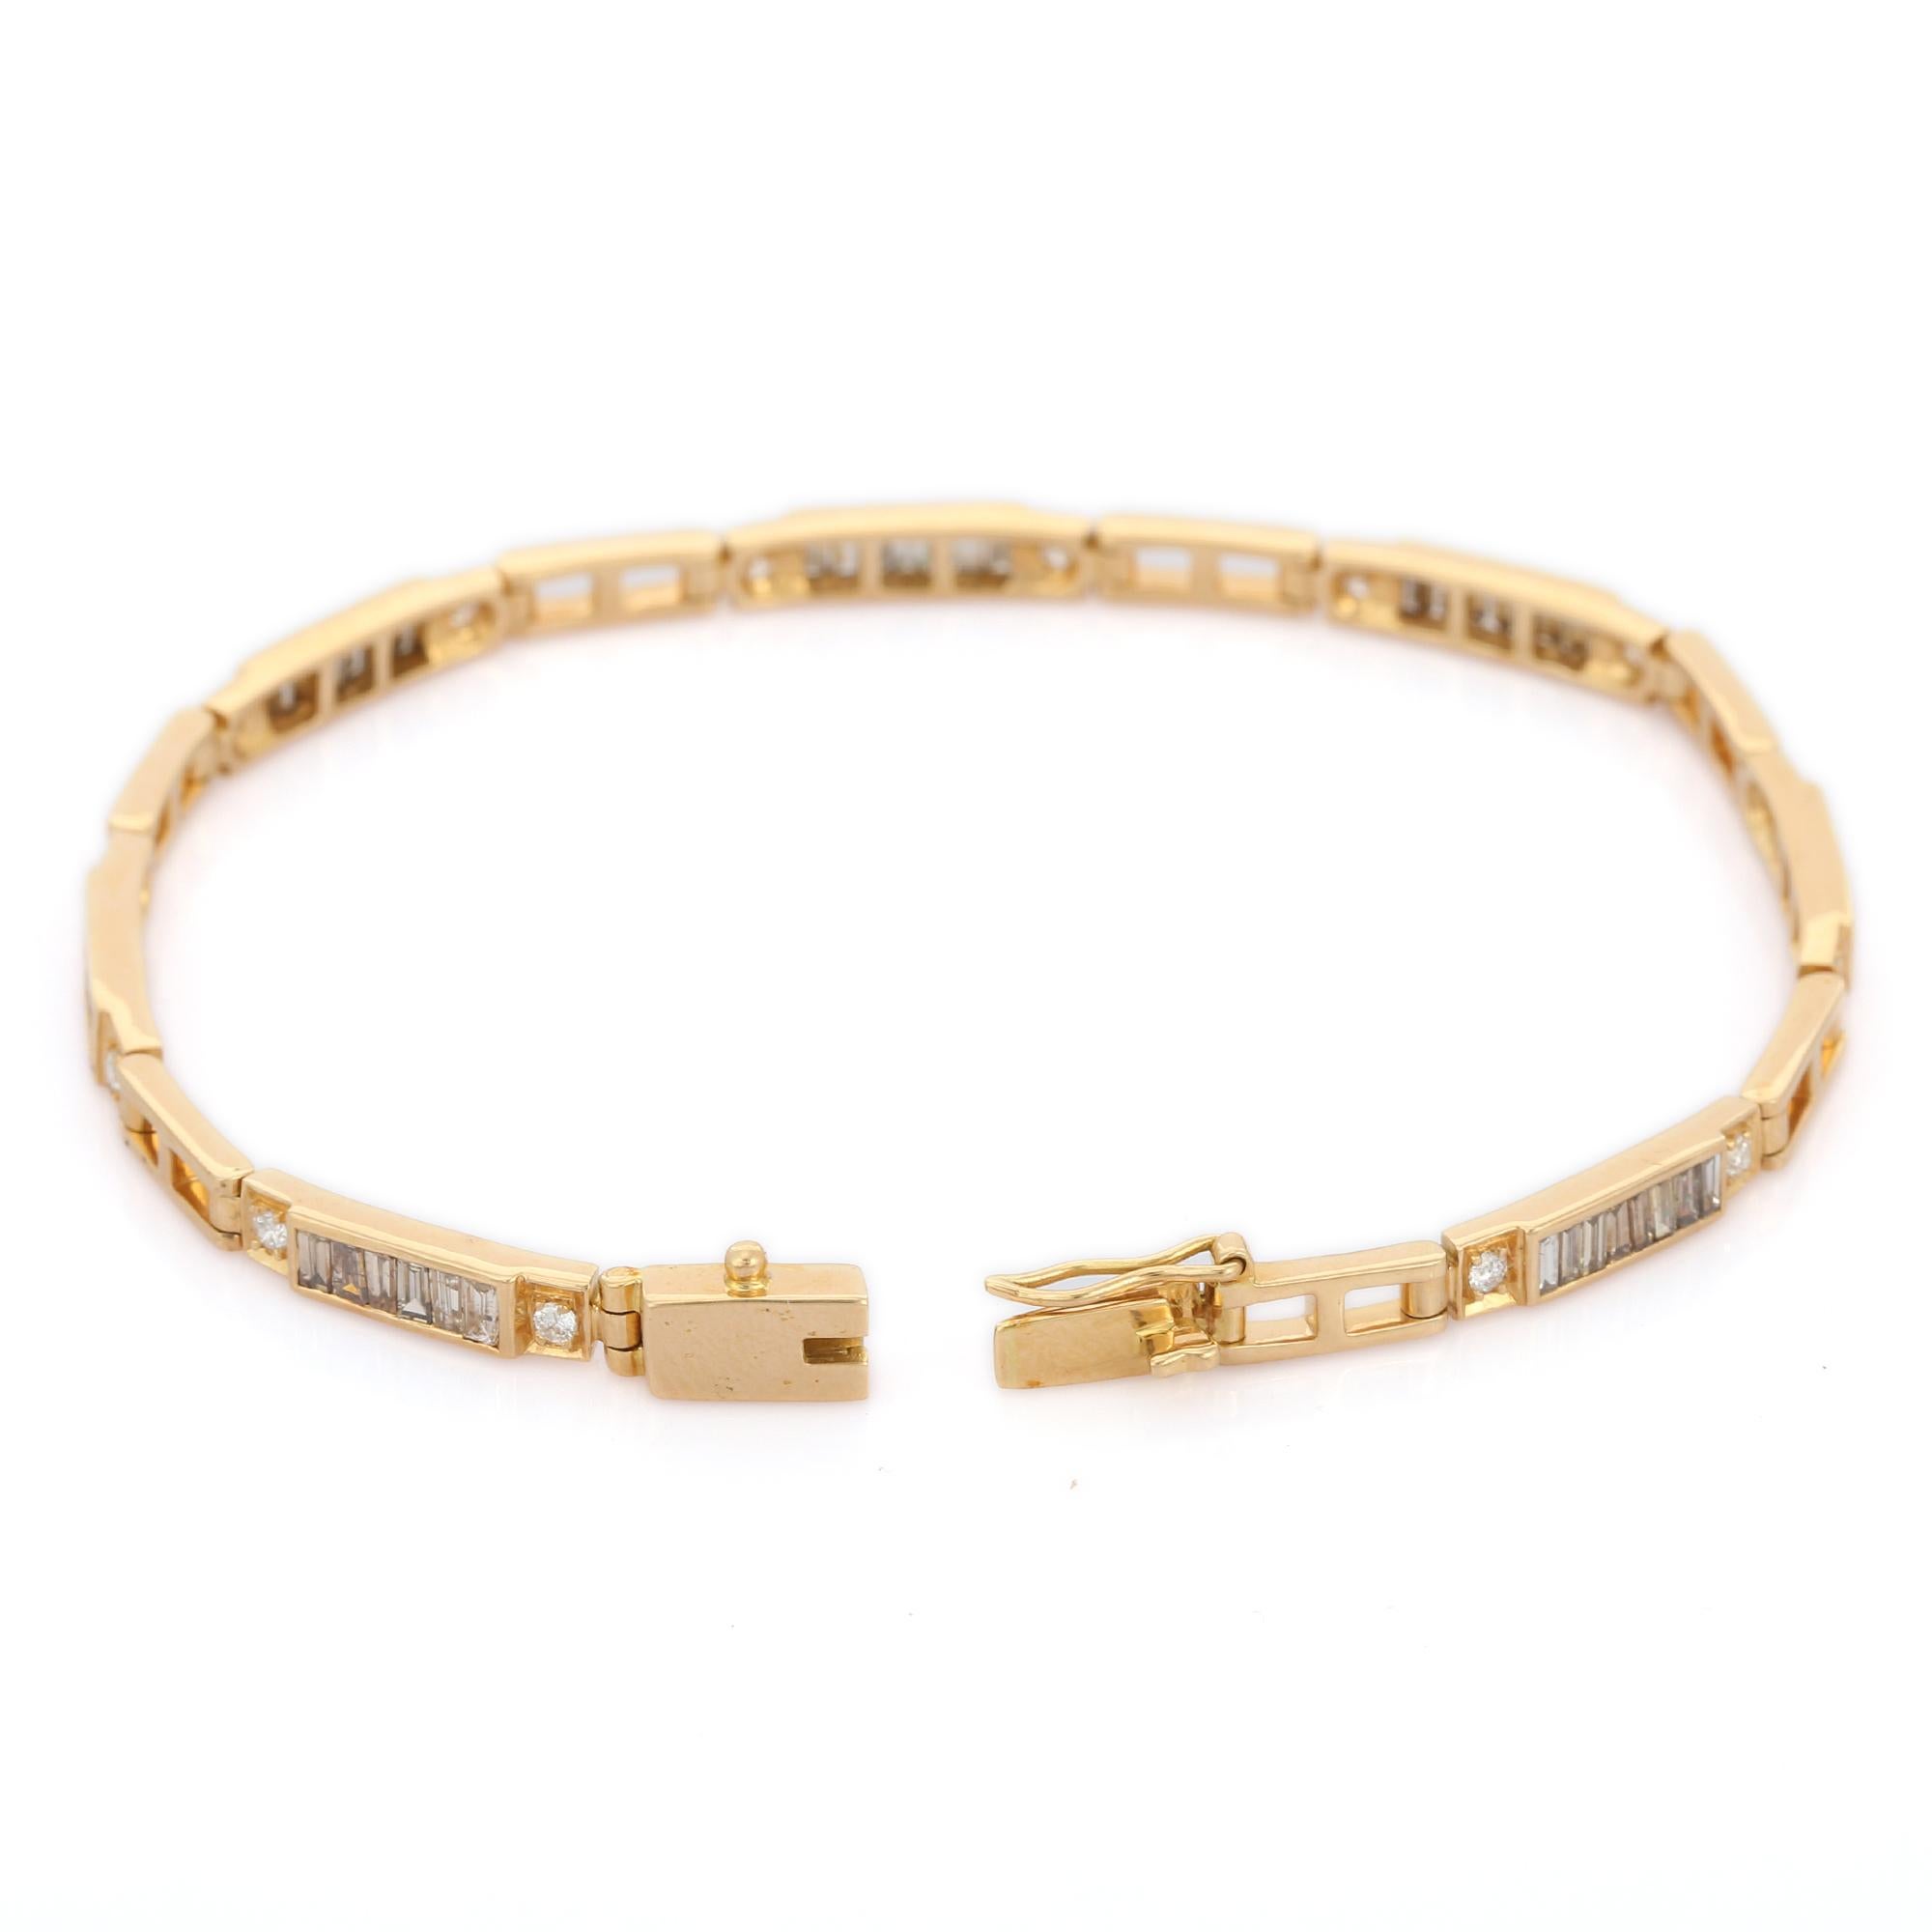 Diamond bracelet in 18K Gold. It has a perfect baguette cut diamonds to make you stand out on any occasion or an event. 
A tennis bracelet is an essential piece of jewelry when it comes to your wedding day. The sleek and elegant style complements